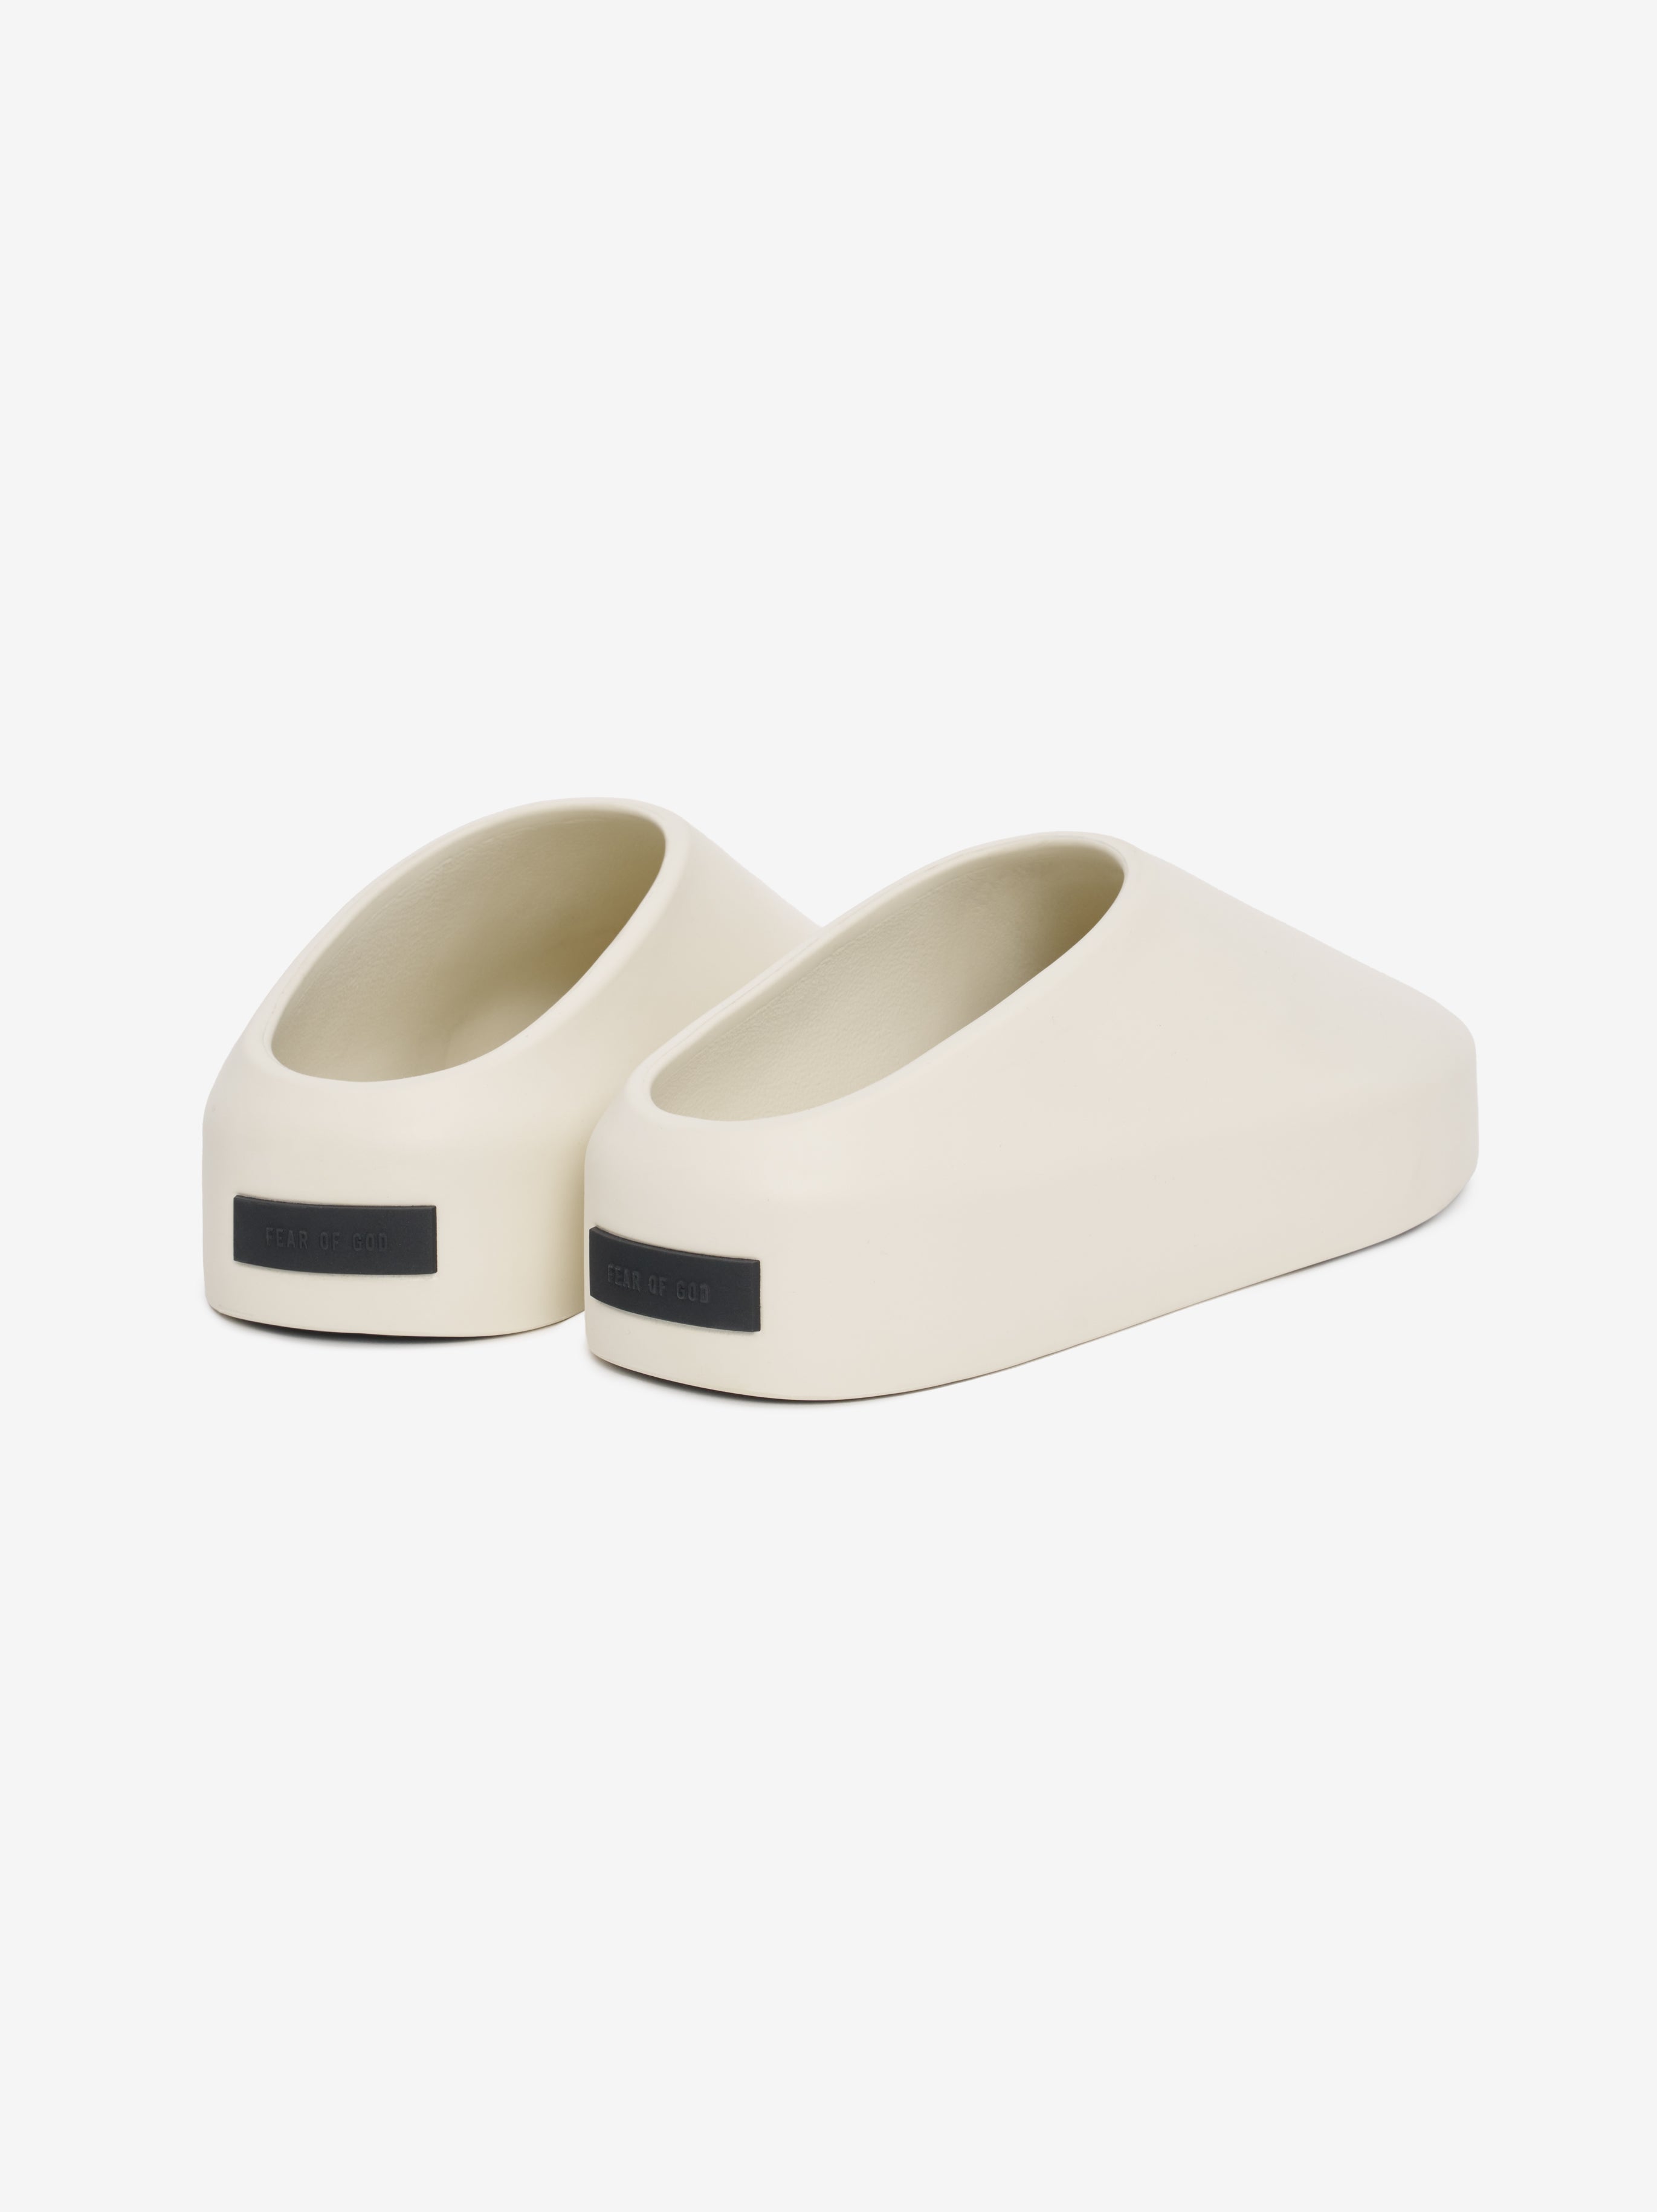 The California Collection 8 - Slip On Shoes | Fear Of God | Fear of God